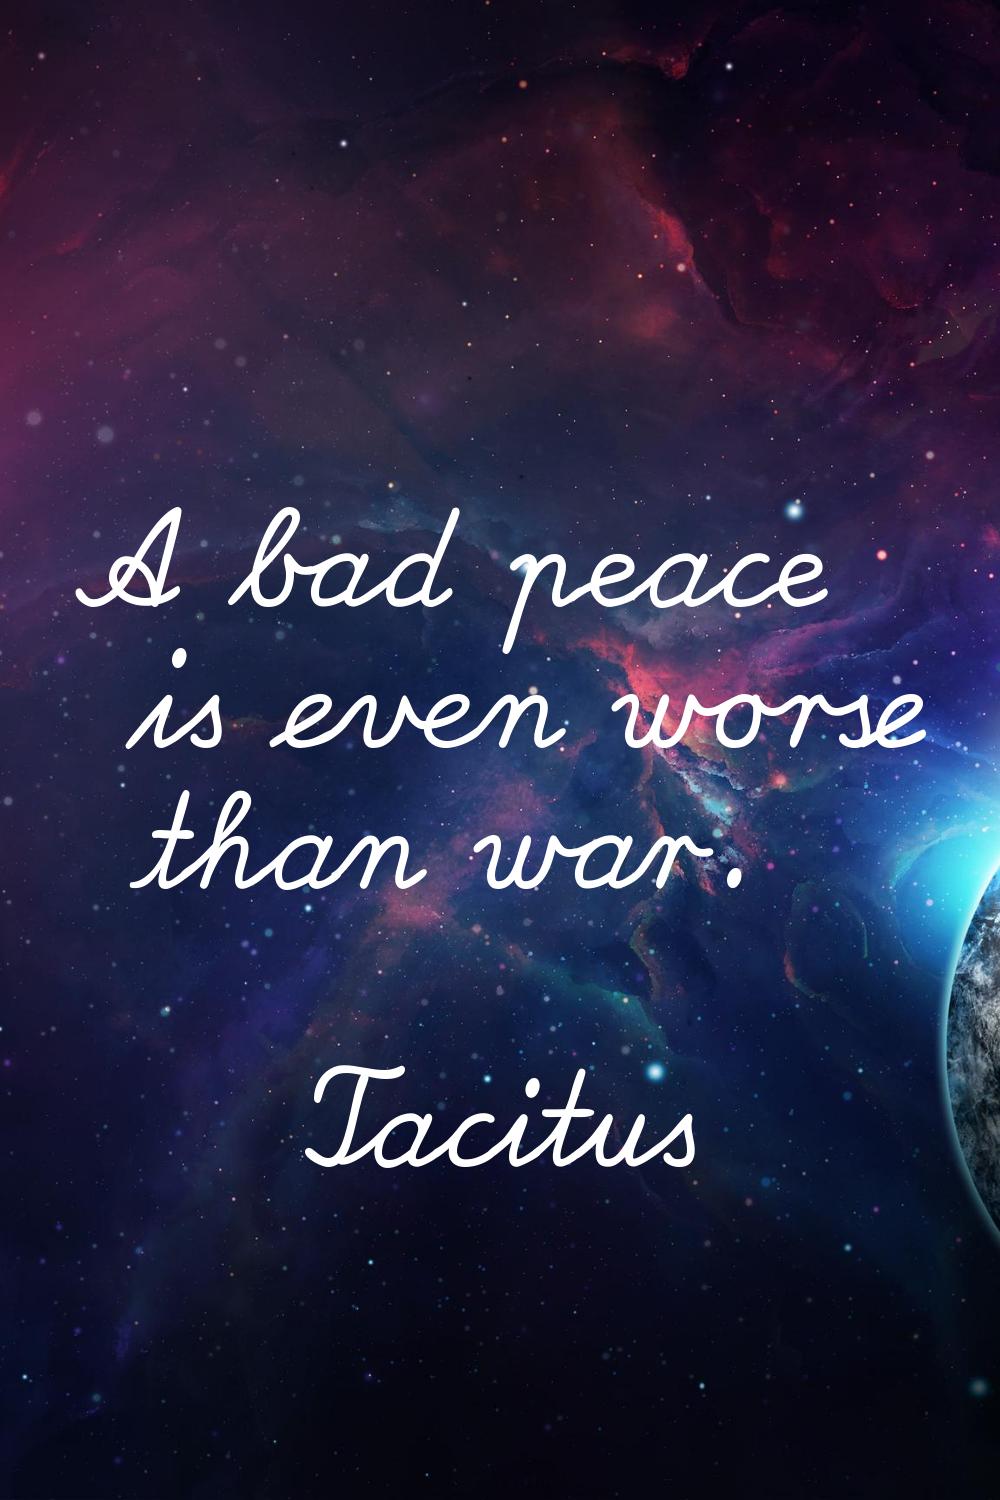 A bad peace is even worse than war.